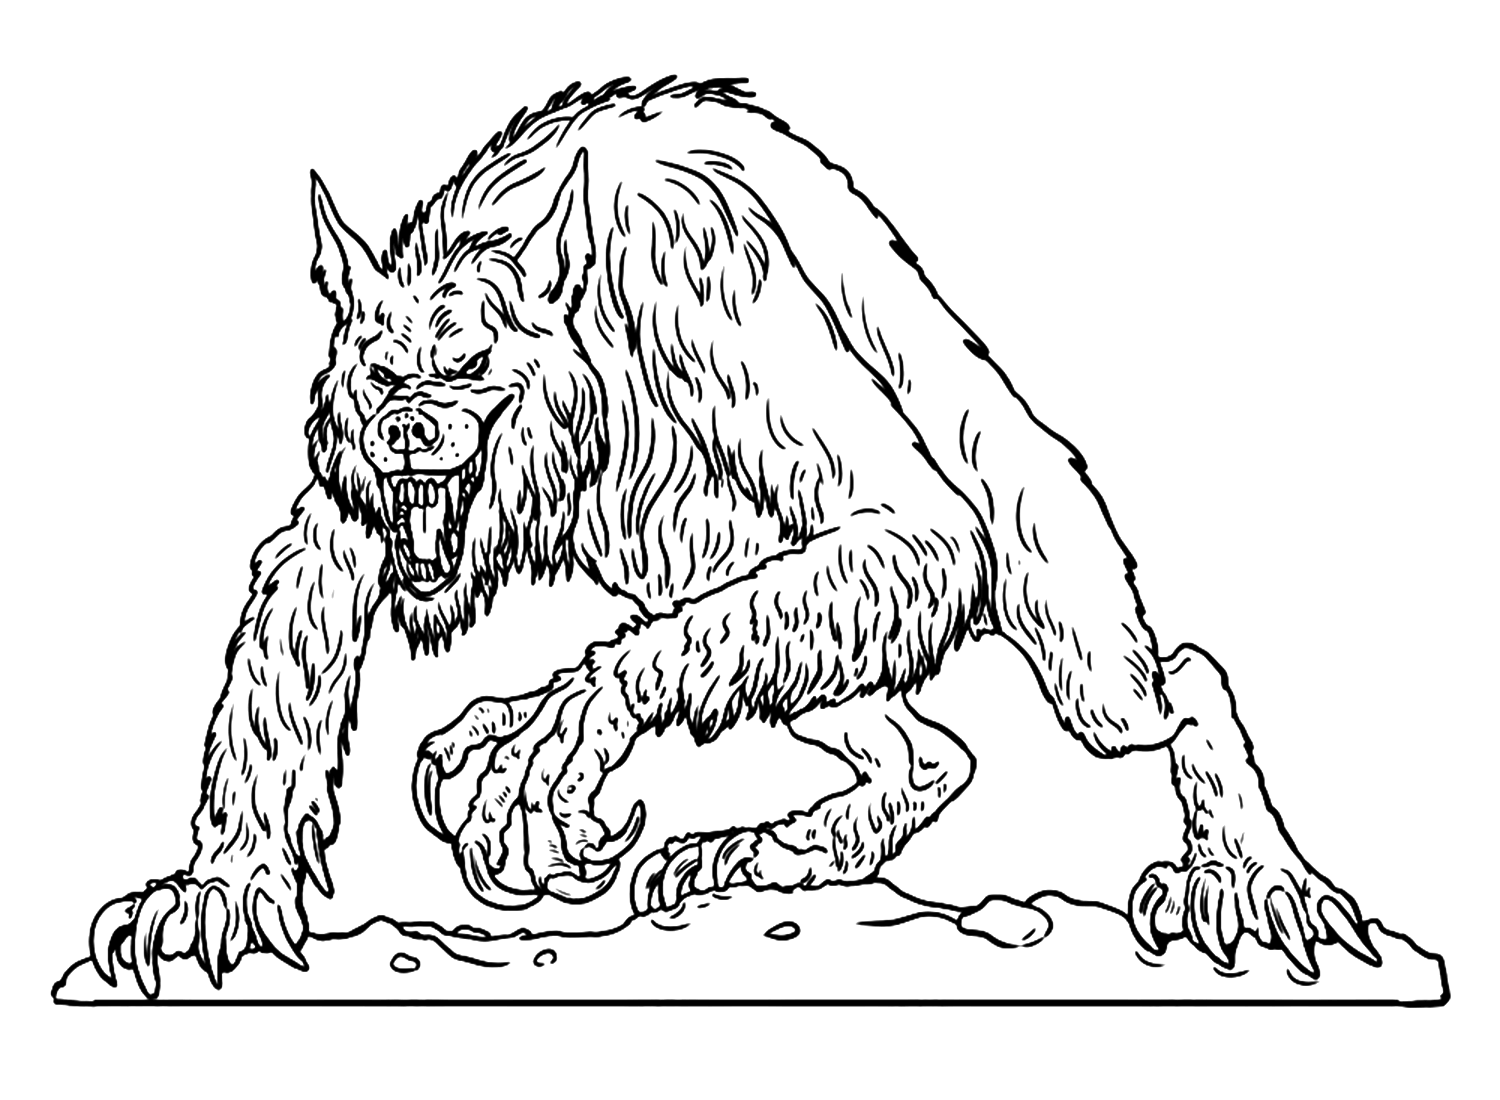 Coloring Pages Of Werewolf from Werewolf